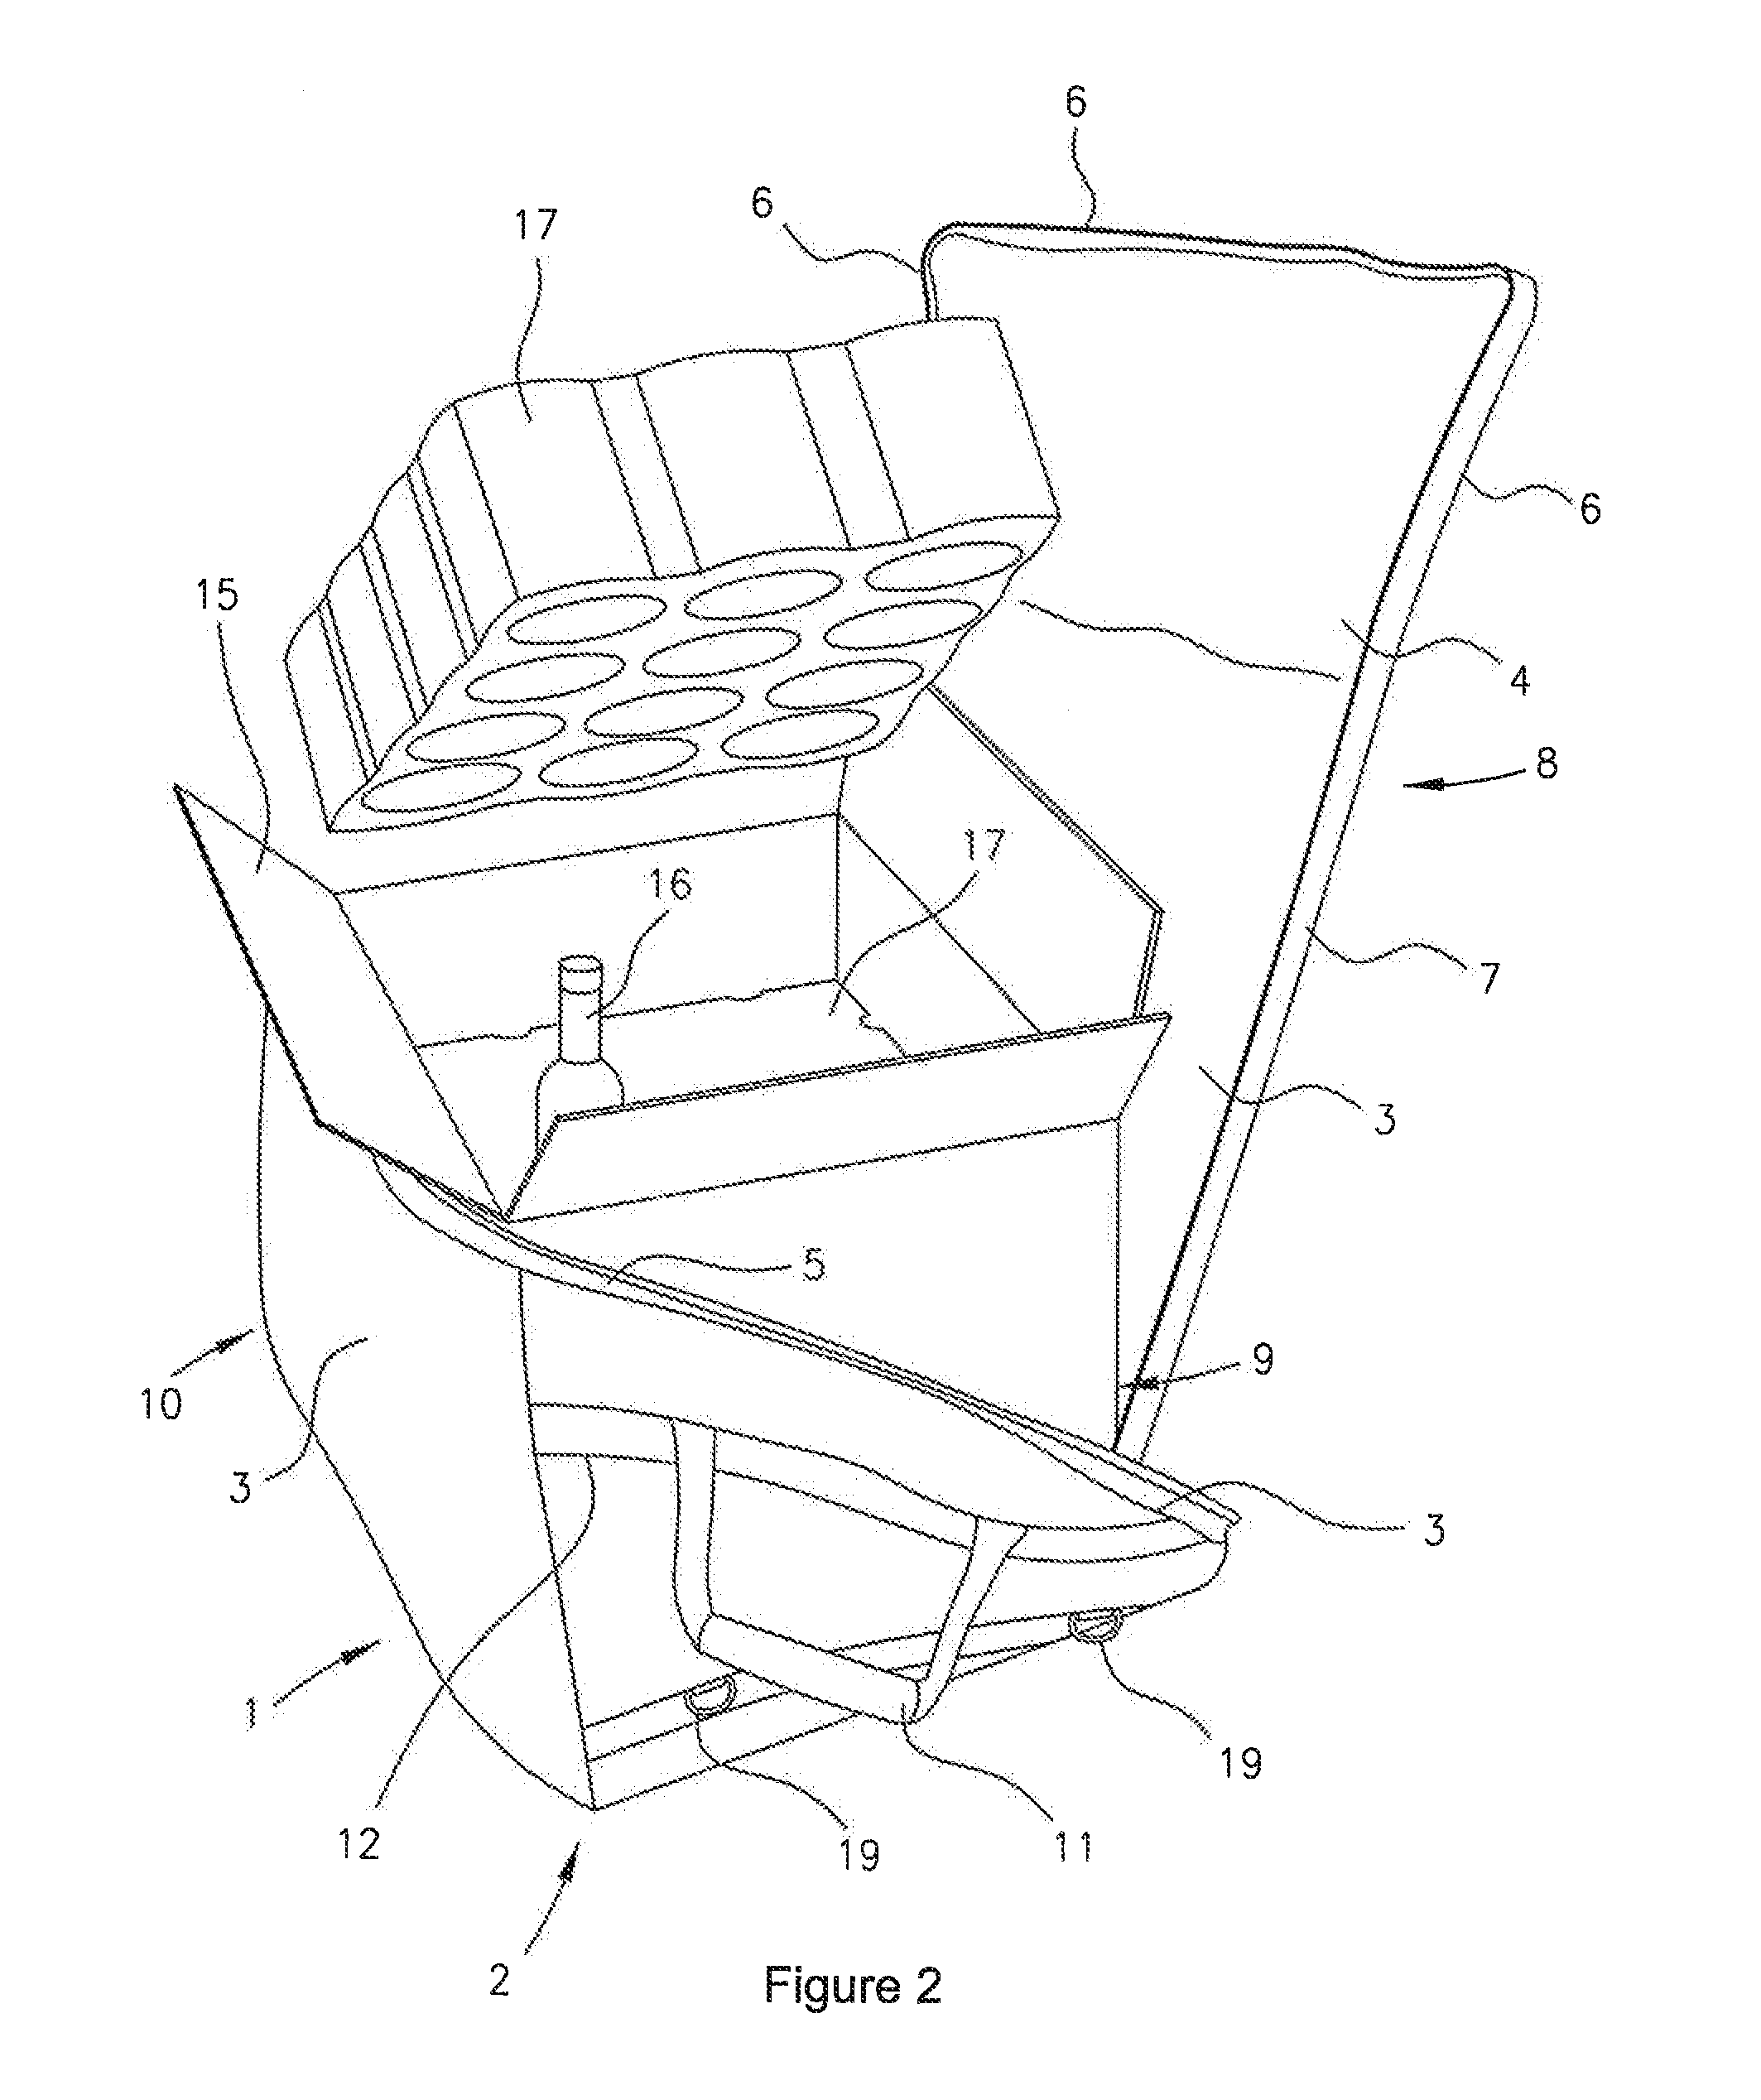 Travel Container for Transporting Of Beverage Containers